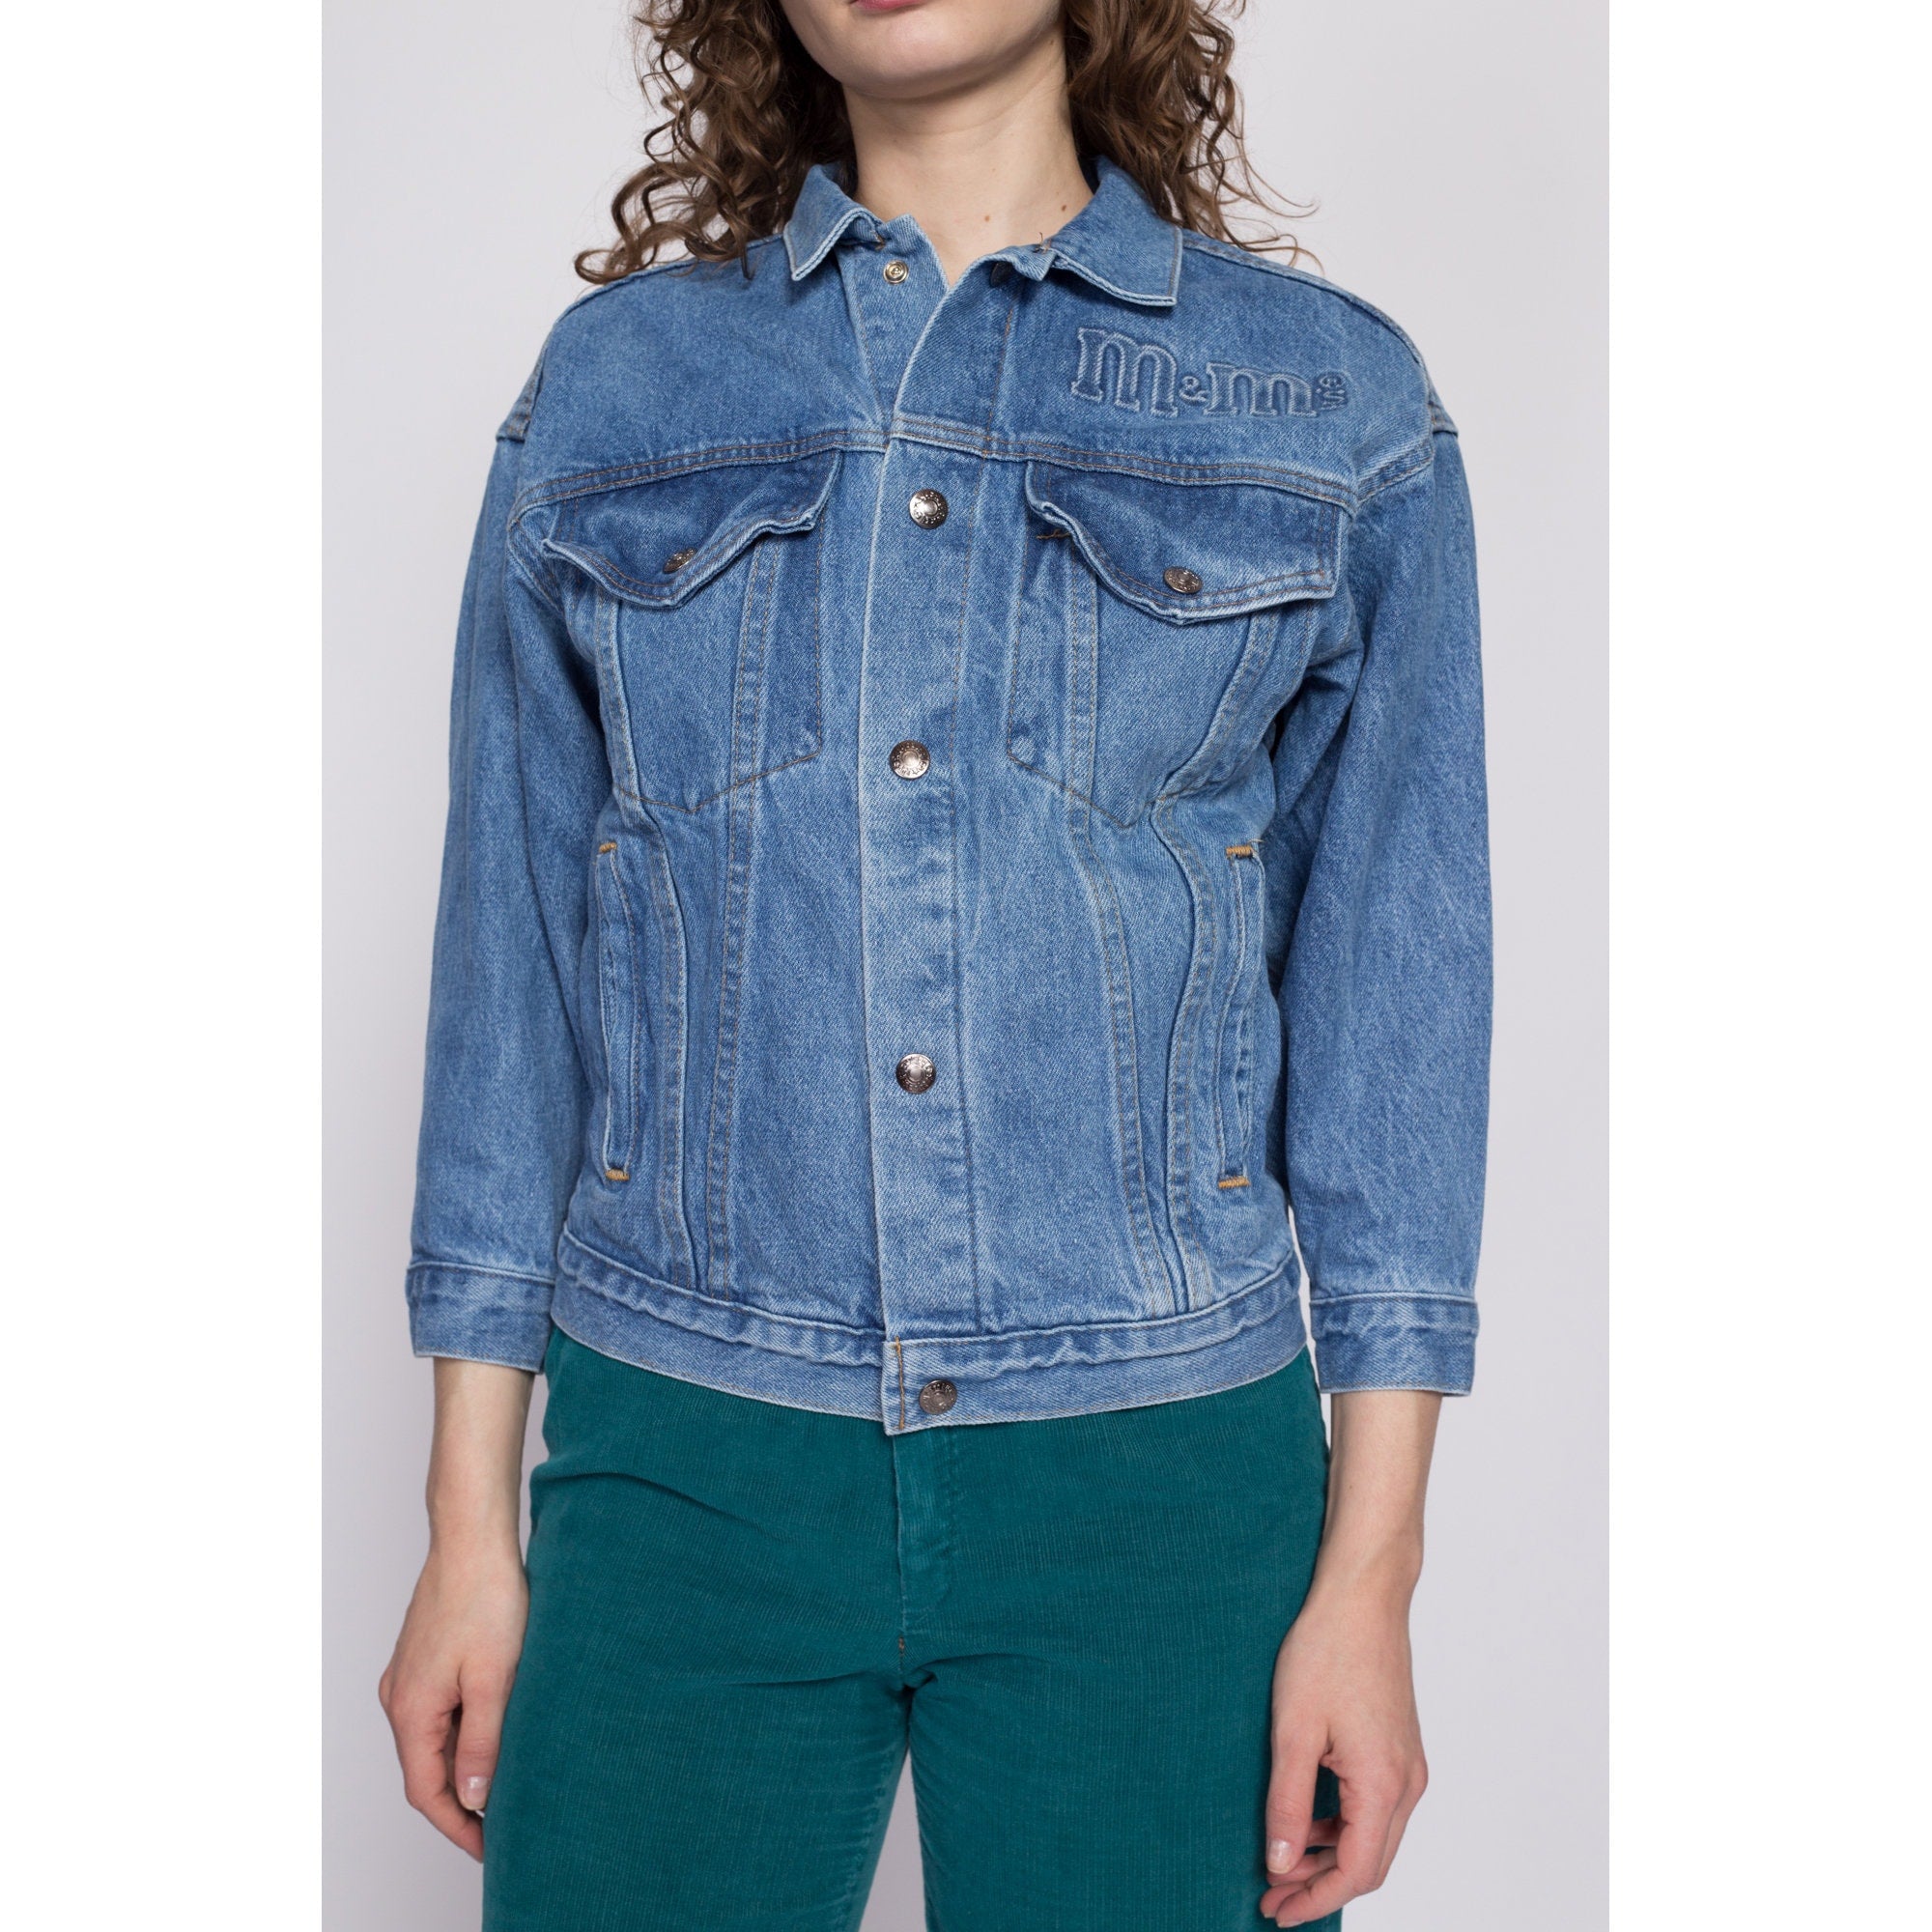 Urban Outfitters OBEY Dreams Graphic Denim Jacket | Mall of America®